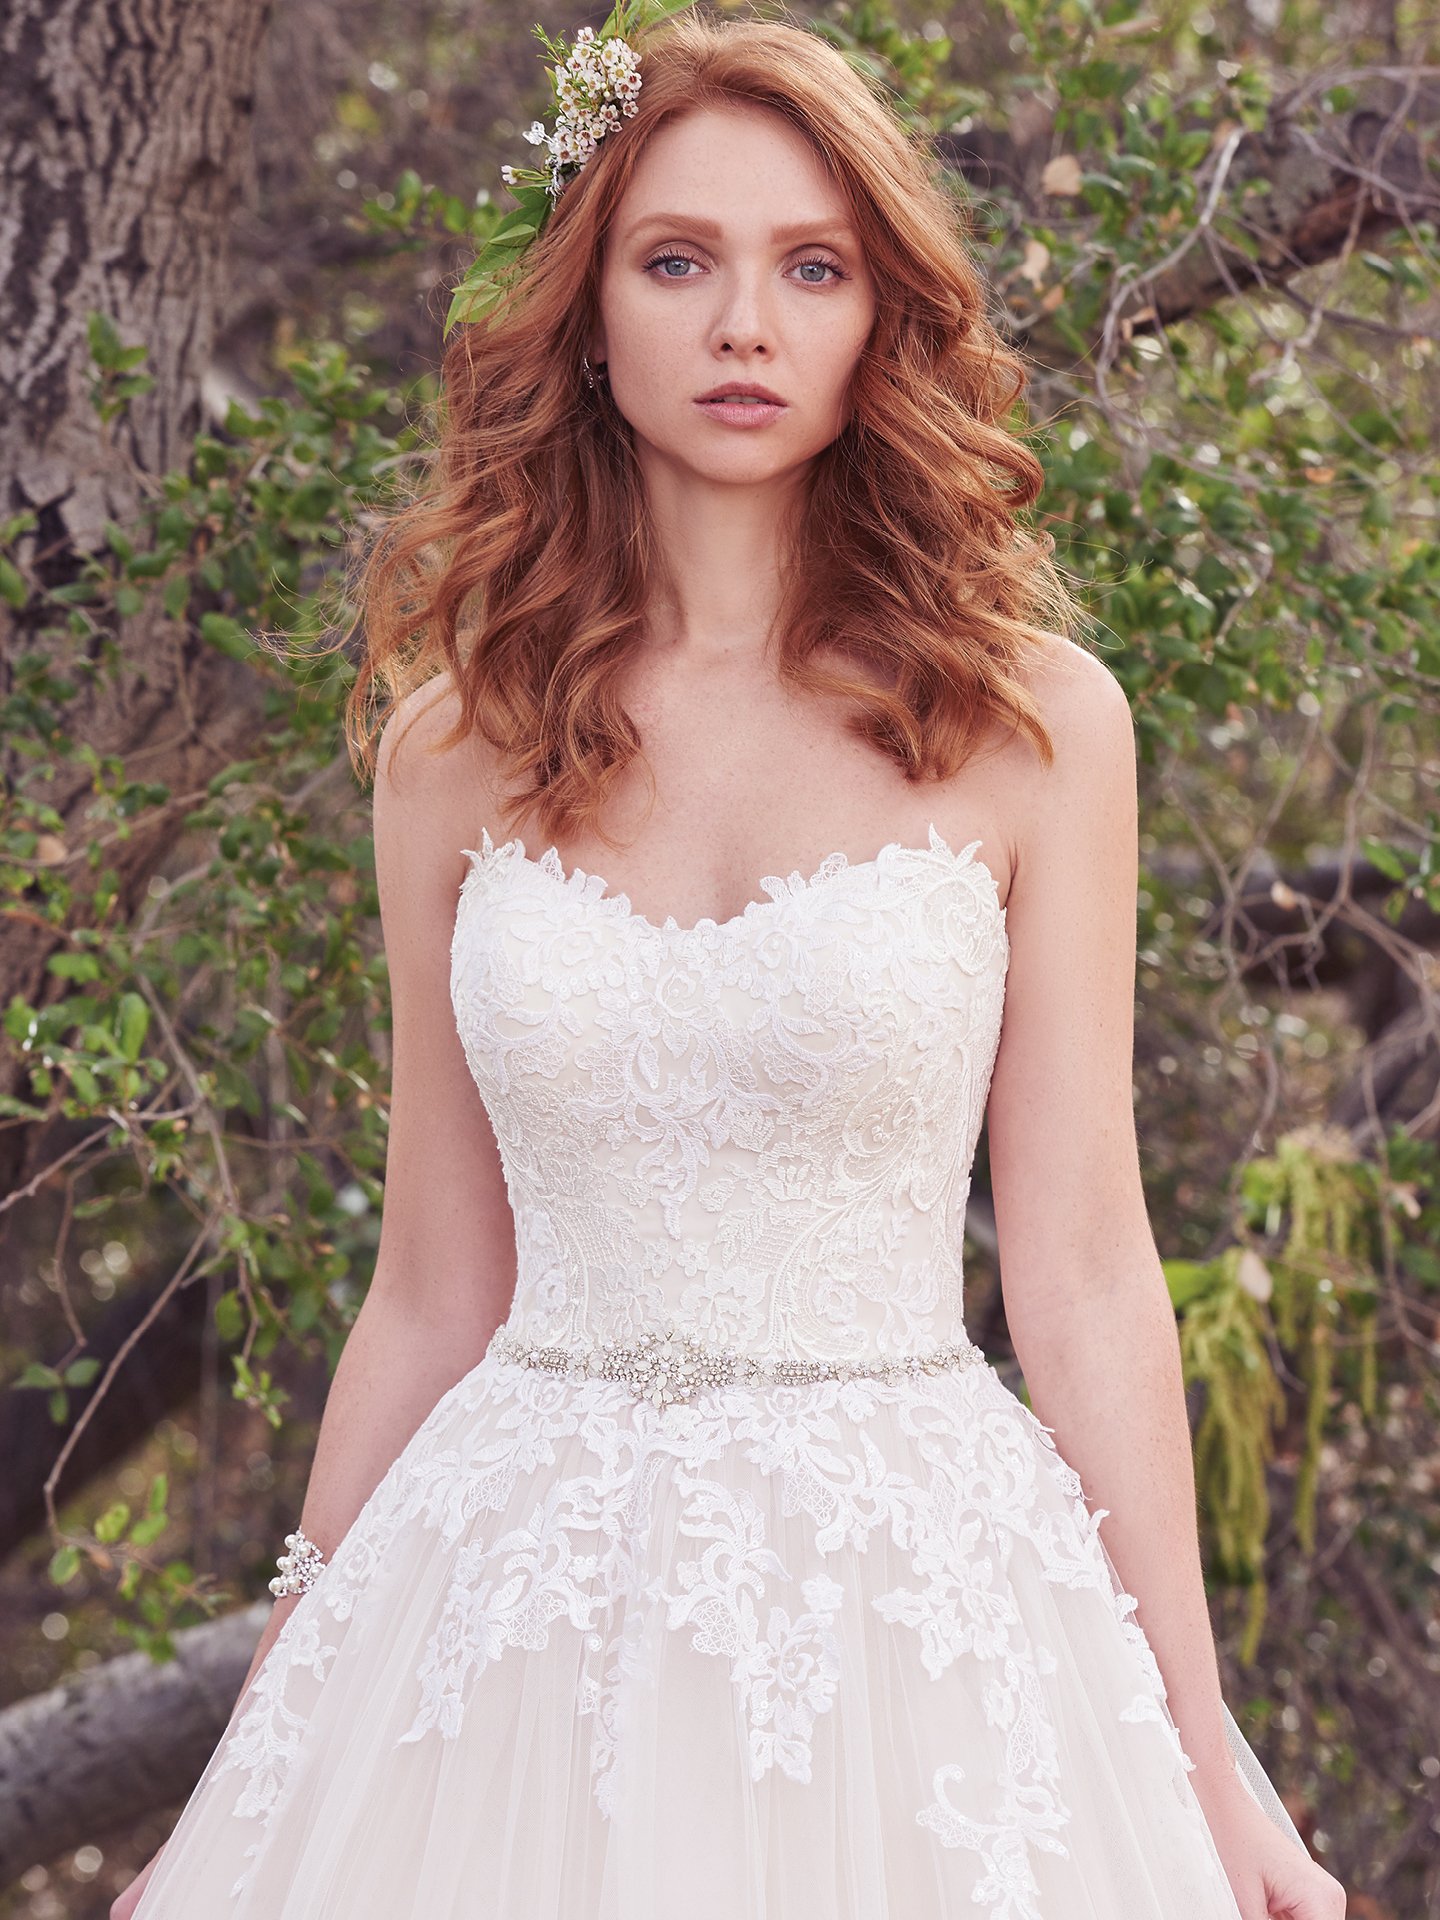 Irma lace ball gown wedding dress by Maggie Sottero. Modern Royalty: Wedding Dresses Inspired by the Royal Engagement